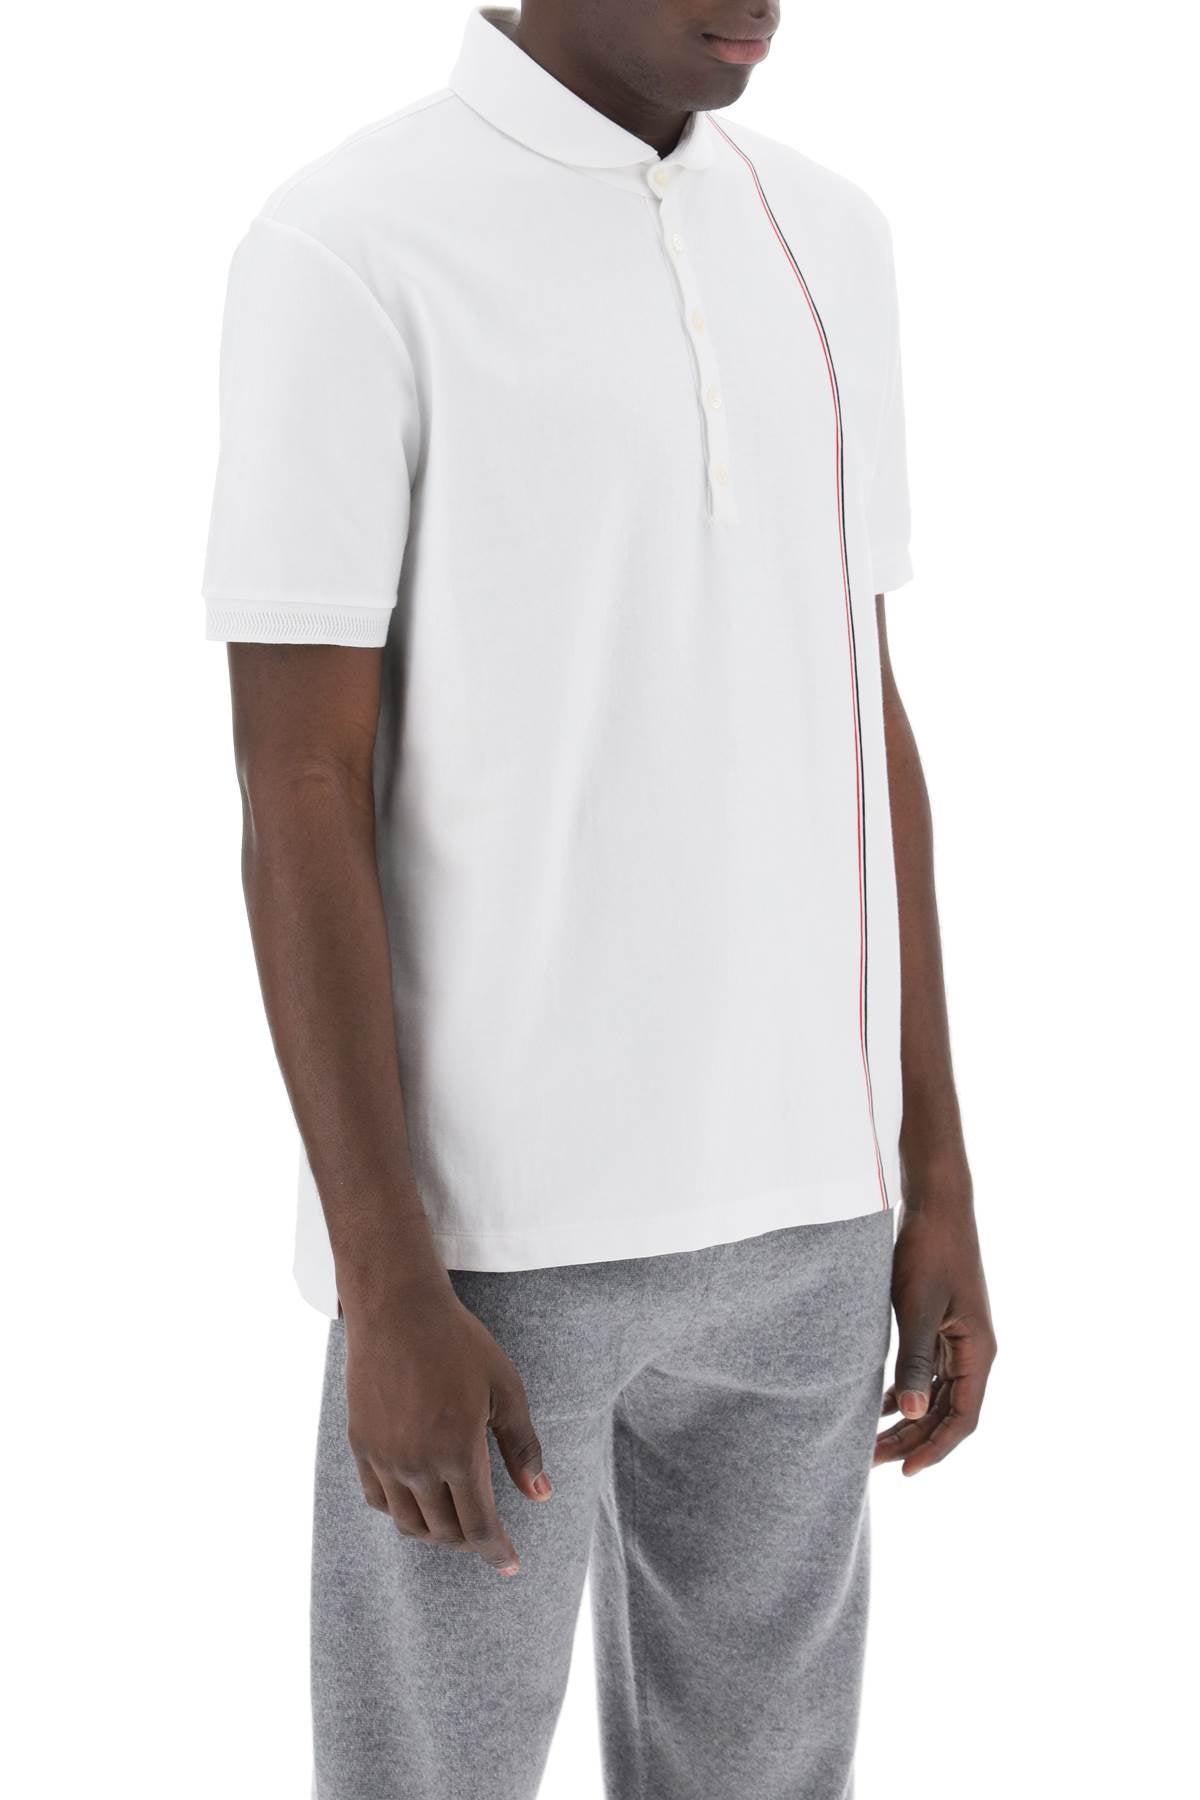 Thom browne polo shirt with tricolor intarsia-1